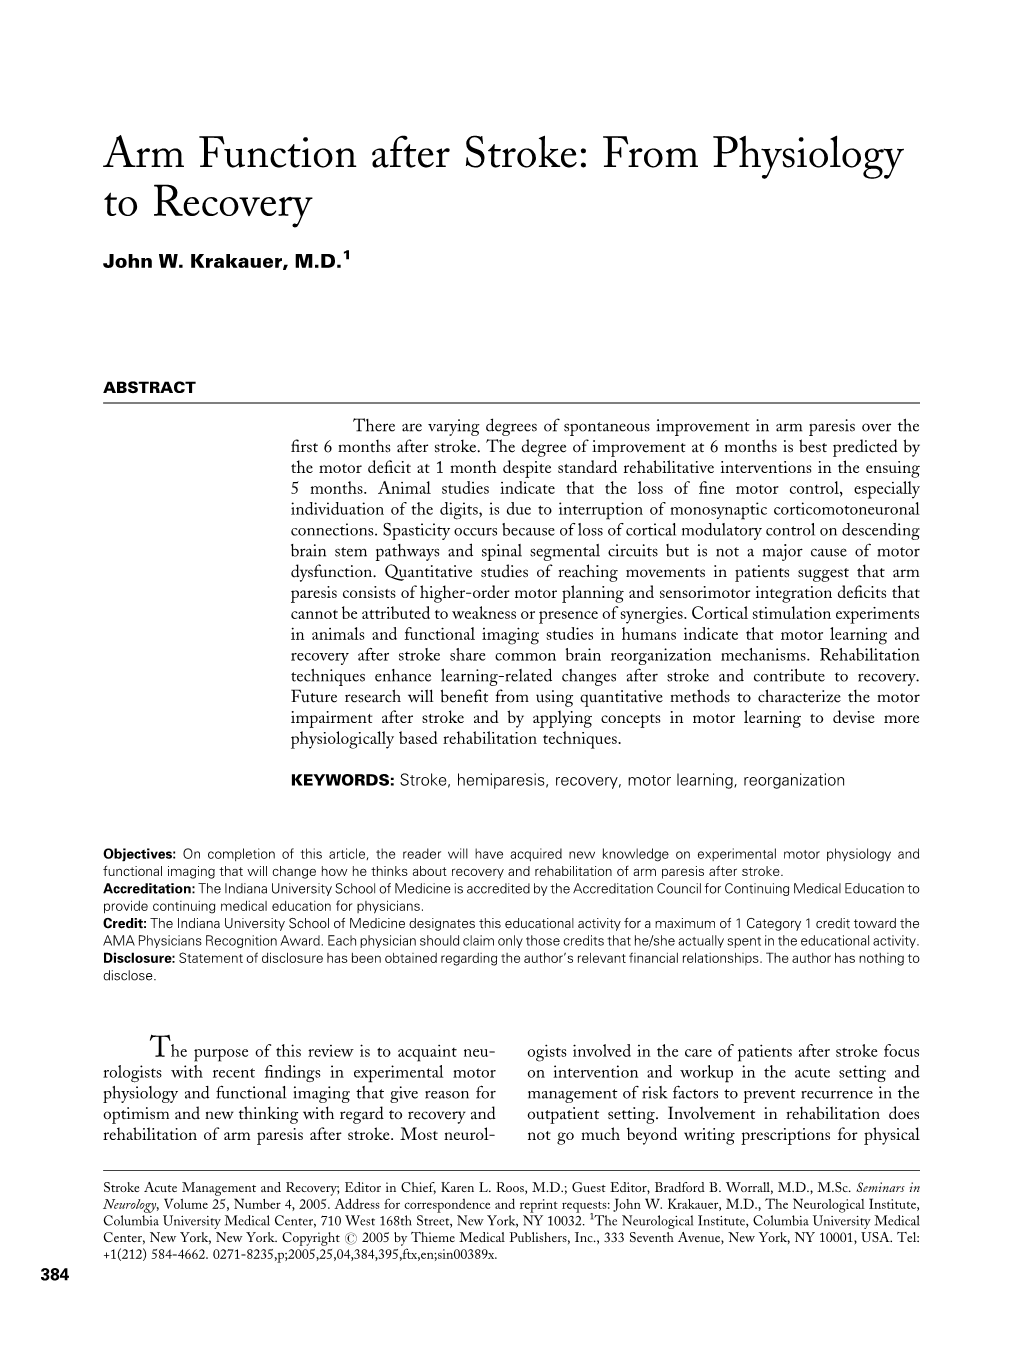 Arm Function After Stroke: from Physiology to Recovery